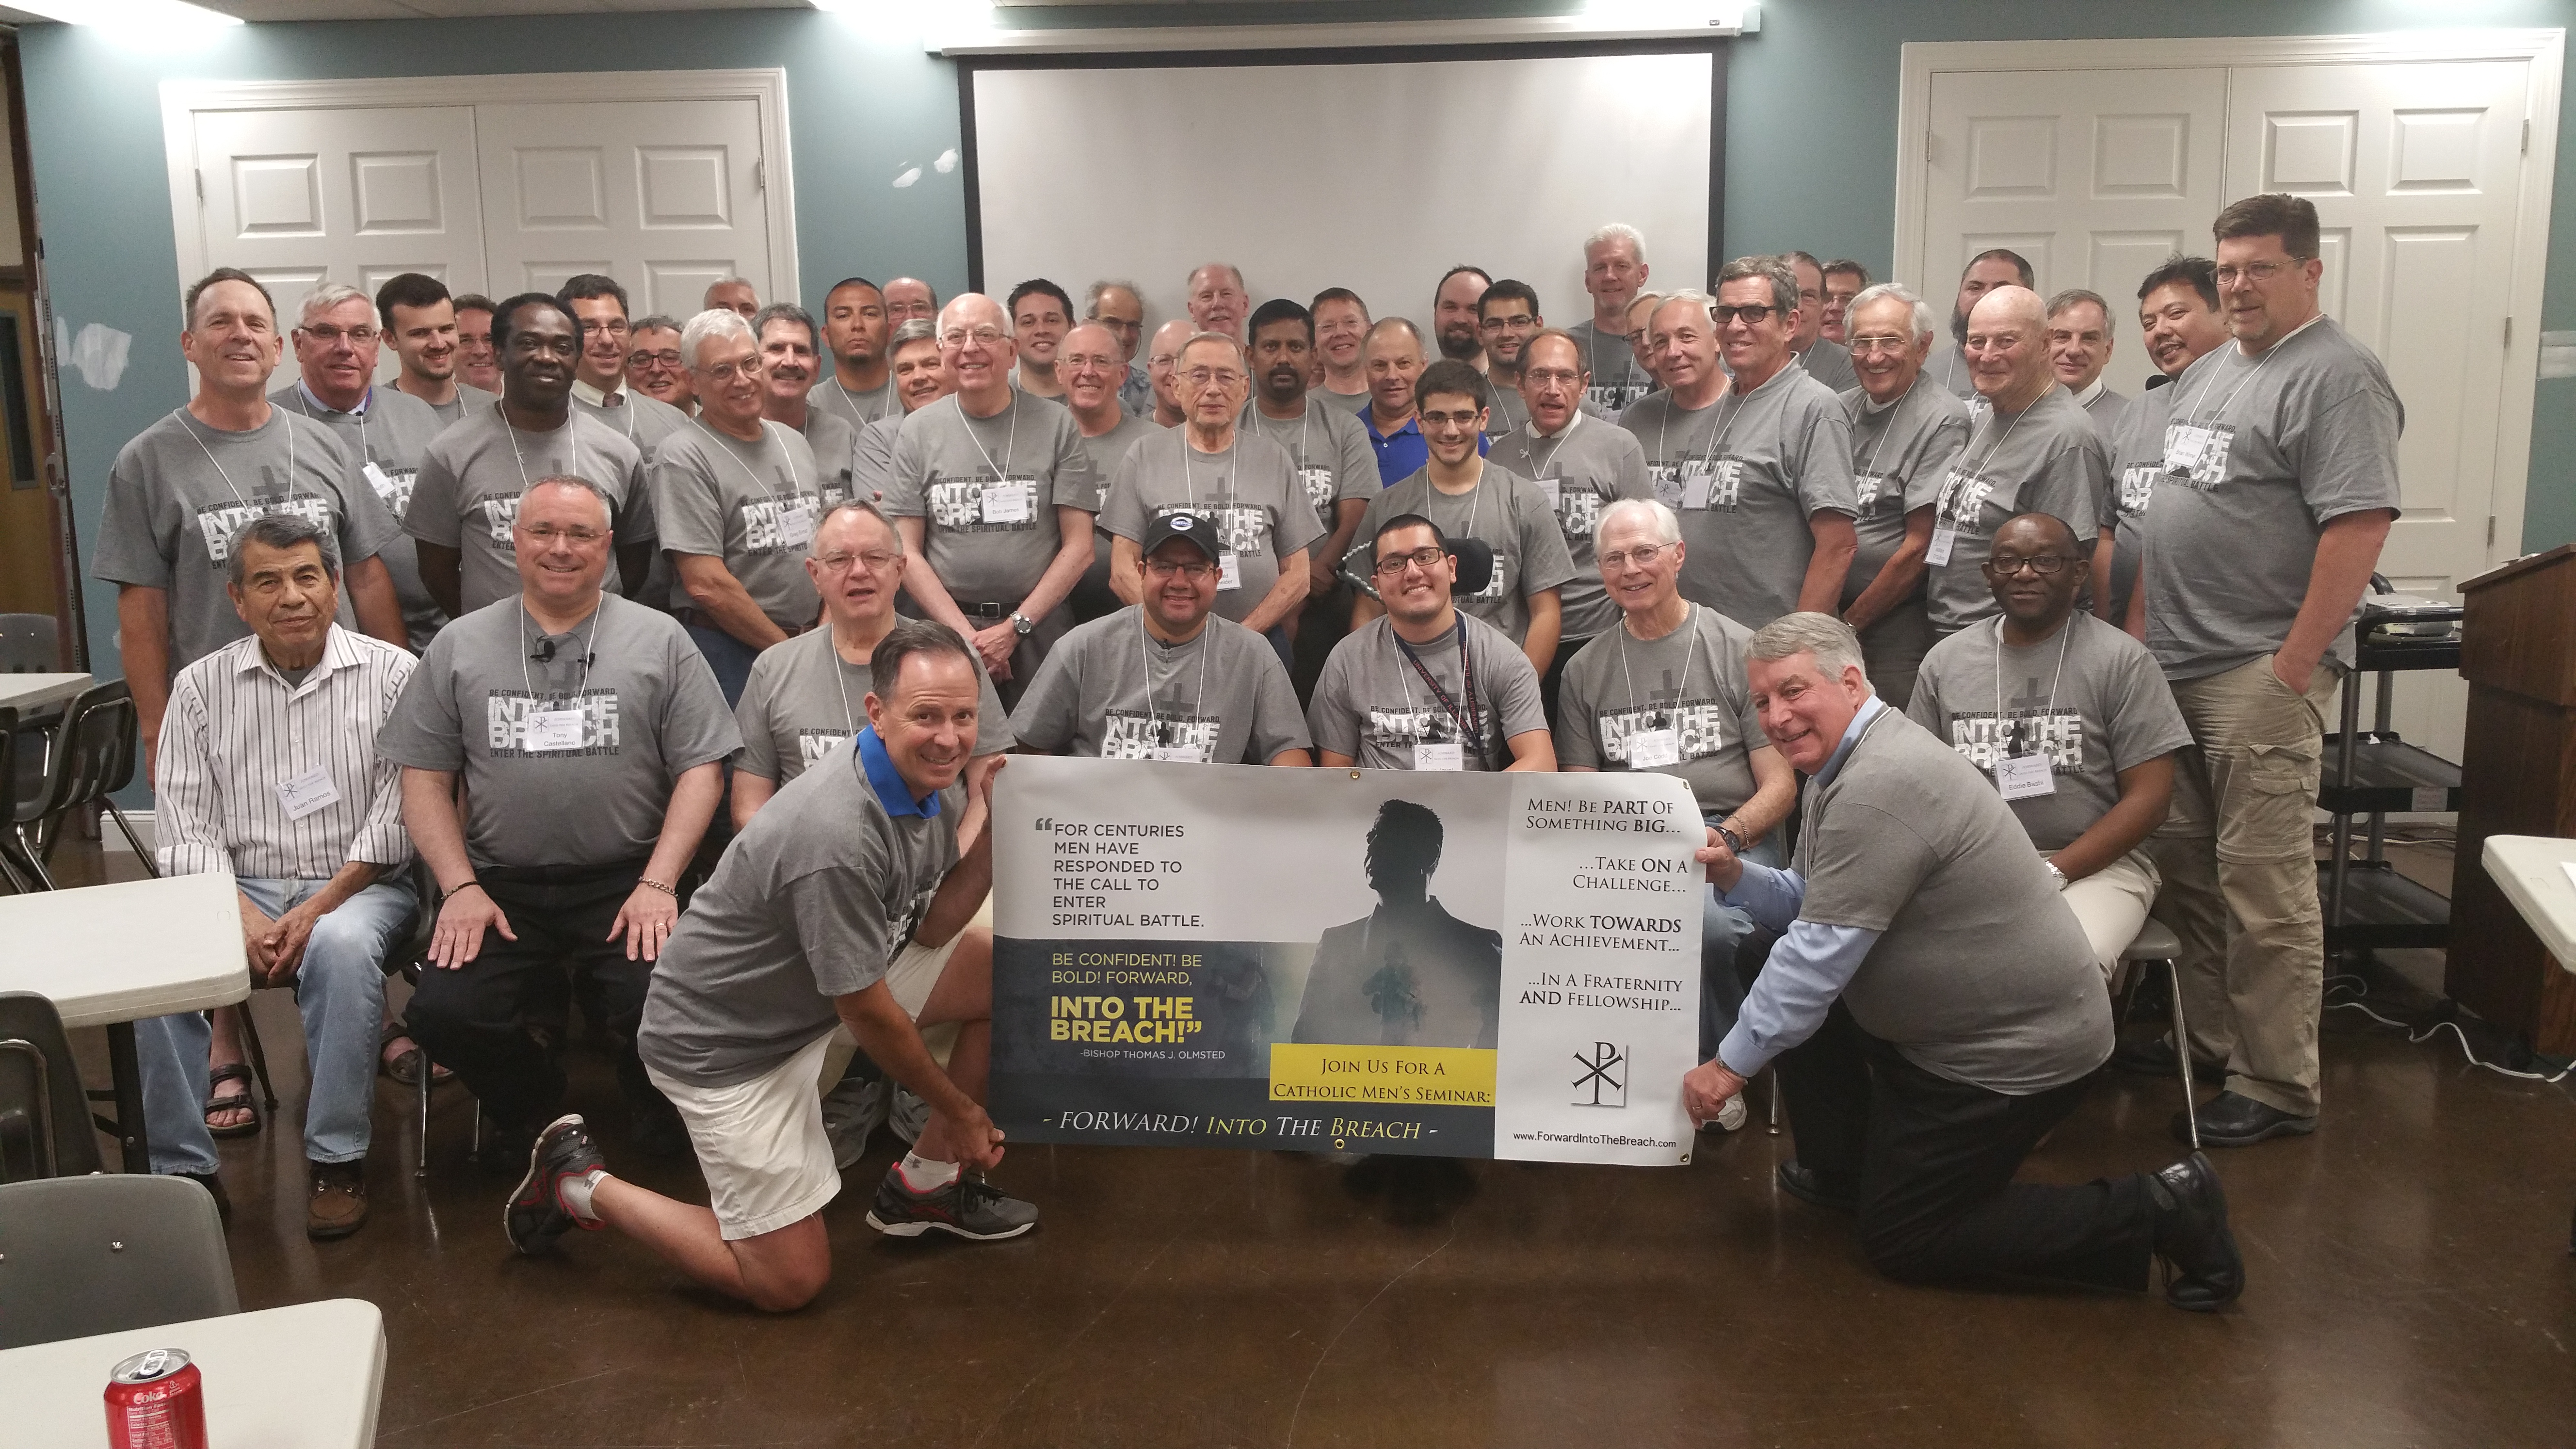 More than 60 men participated in a "Forward! Into the Breach" seminar over the summer in the Archdiocese of Washington. (Photo courtesy of Tony Castellano)